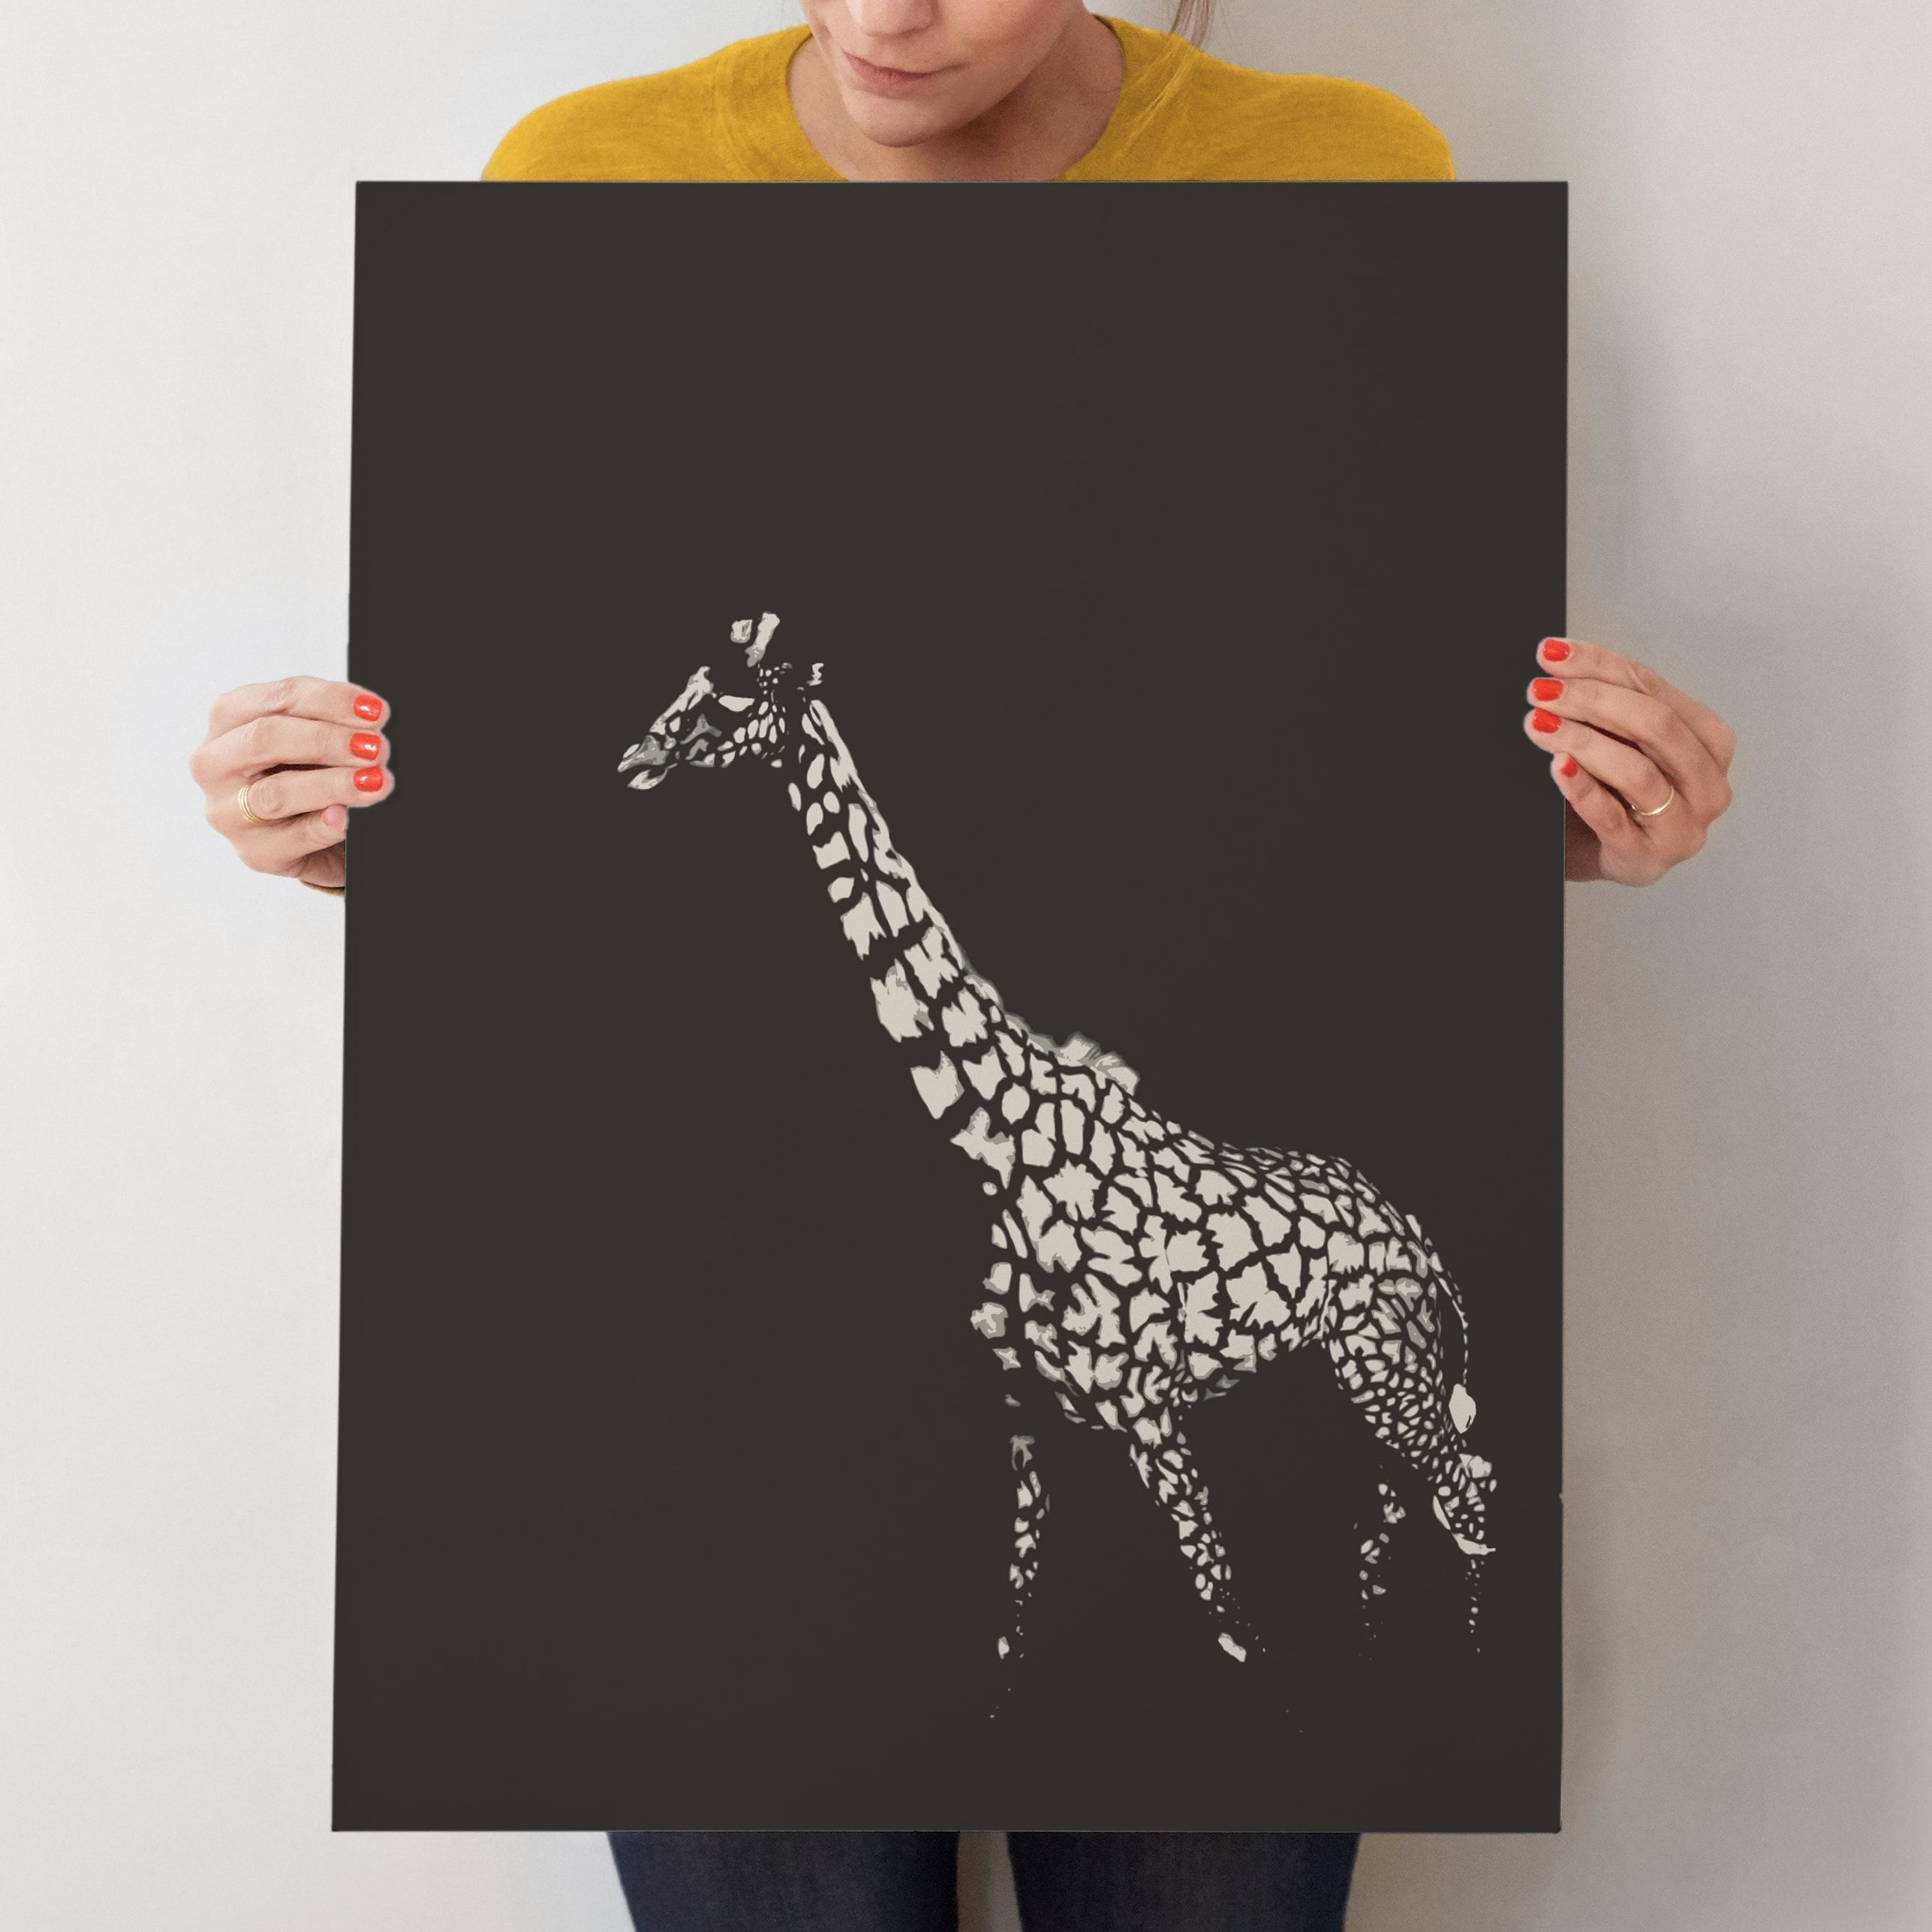 "fading giraffe" - Graphic Limited Edition Art Print by Erin Niehenke. | Minted